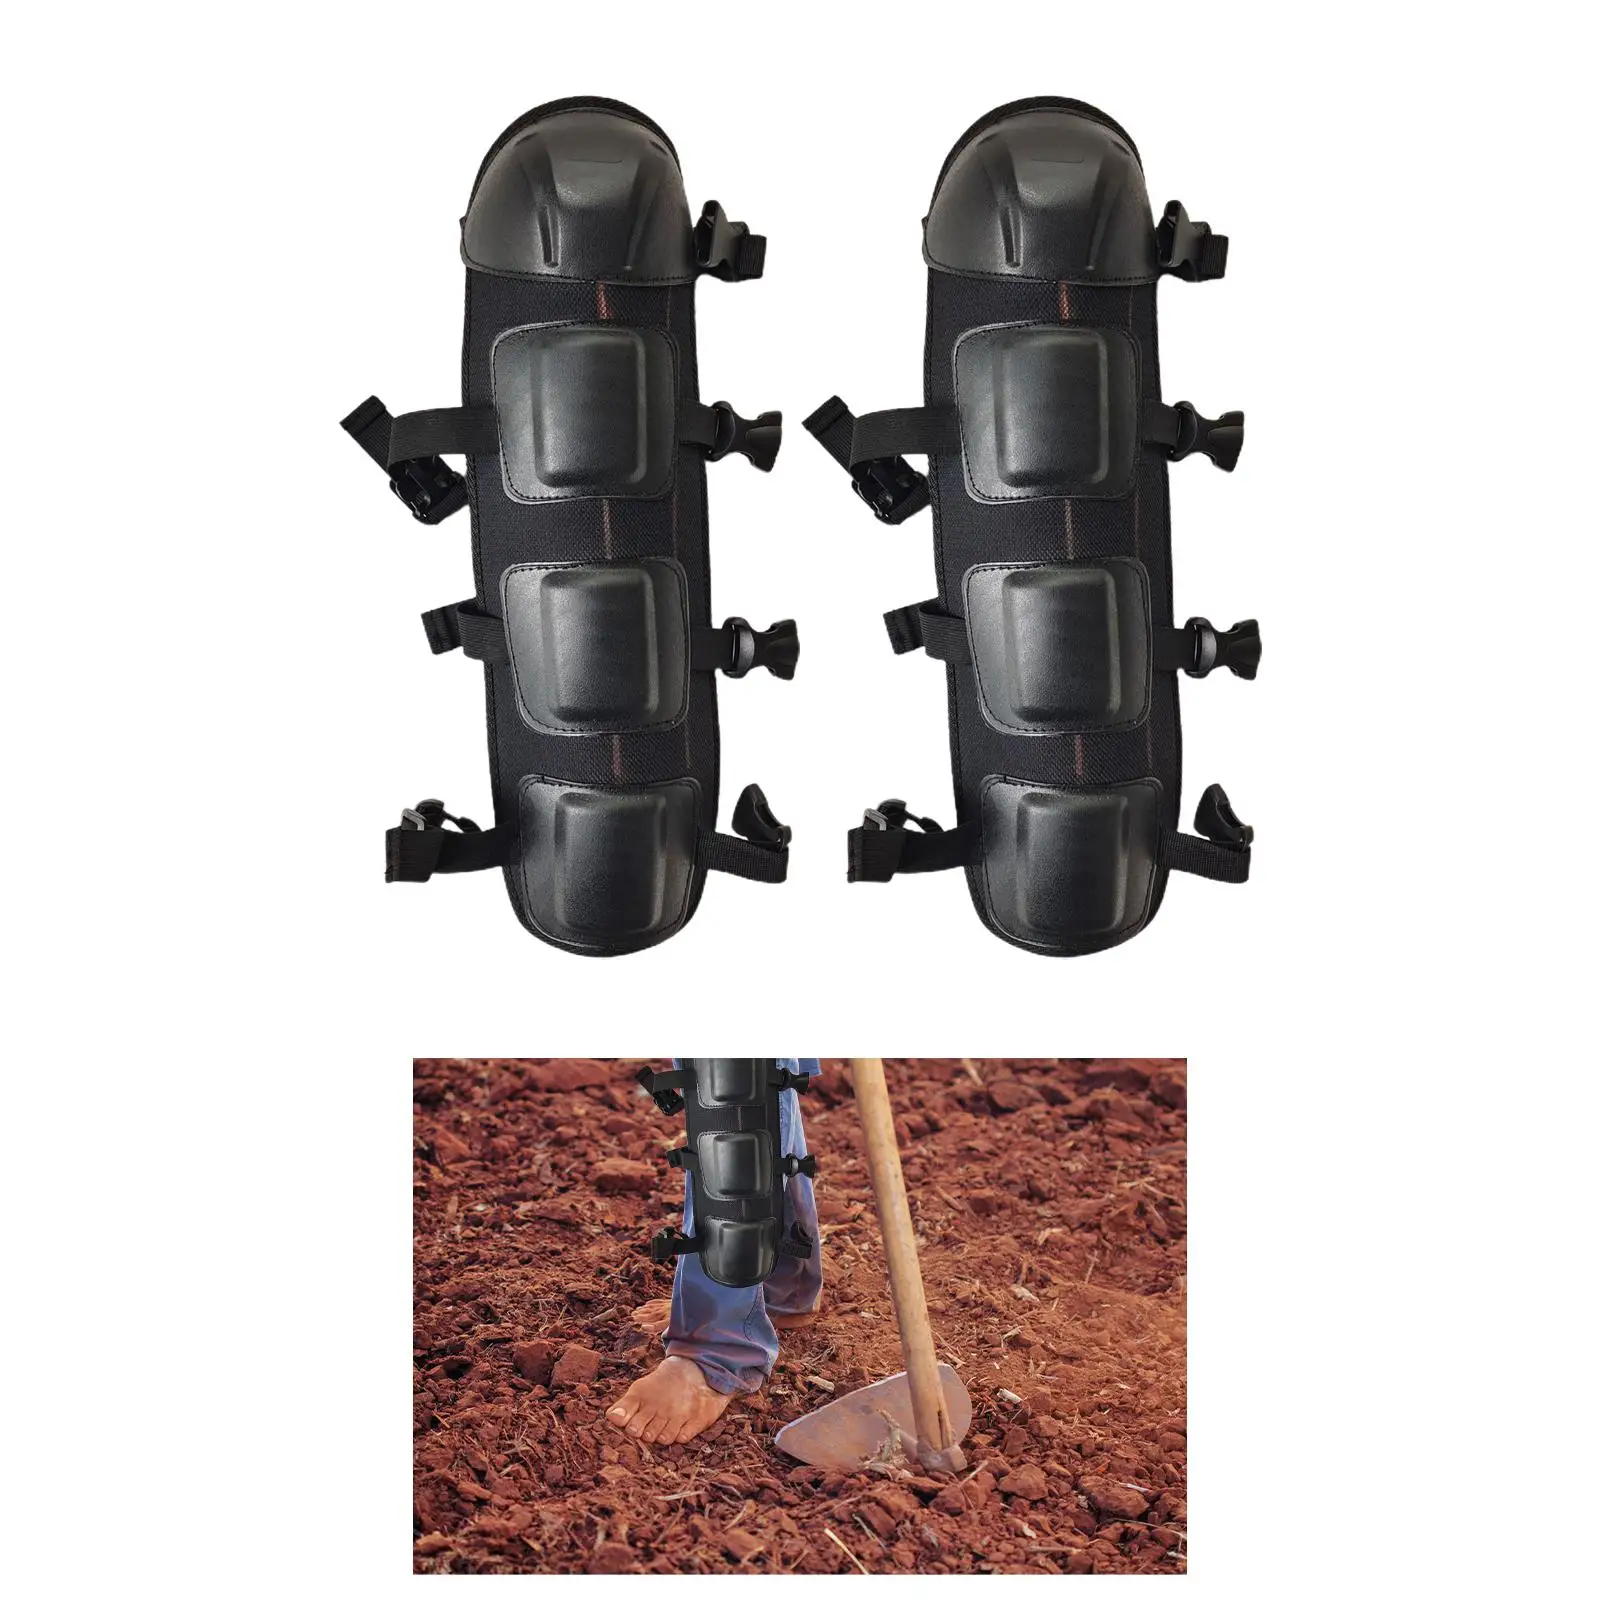 Knee Pads Kneelet Protective Gear Chain Saw Shin Guards for Garden Cycling